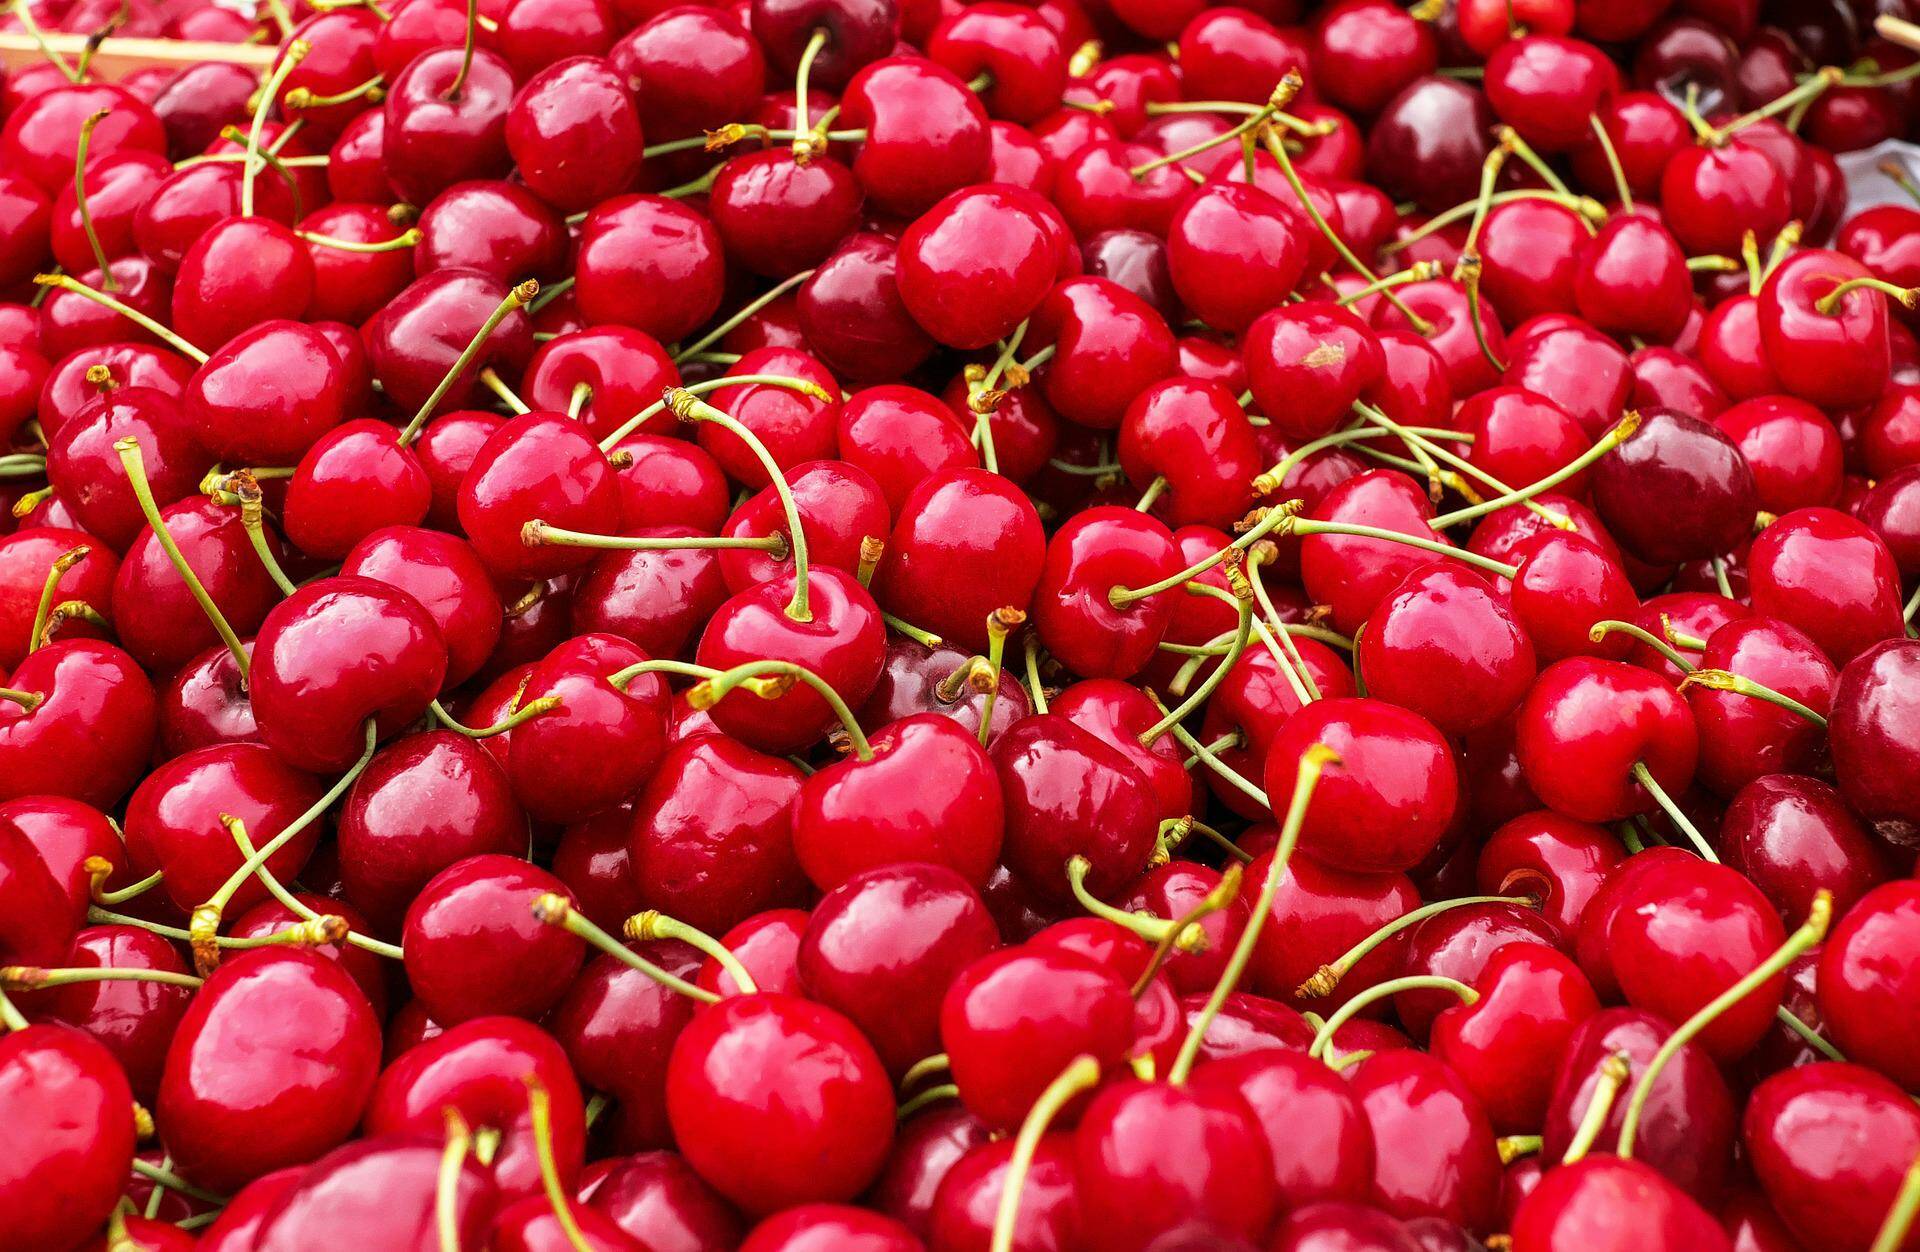 B.C. cherry farmers and other fruit growers have been challenged by weather patterns. (pixabay photo)